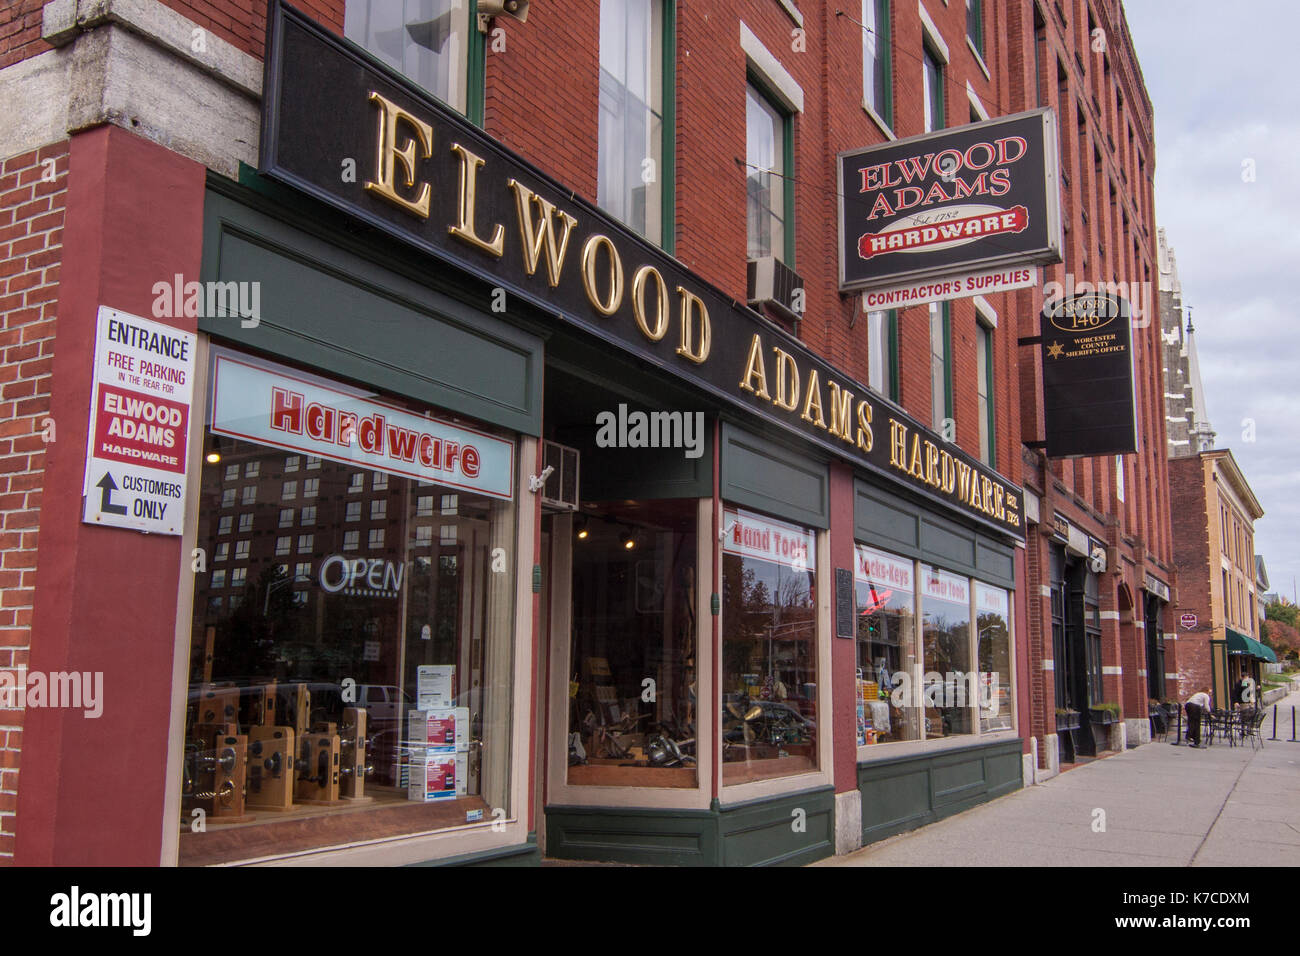 Elwood Adams Hardware Store, Worcester, MA - the oldest hardware store in the country closes. Stock Photo